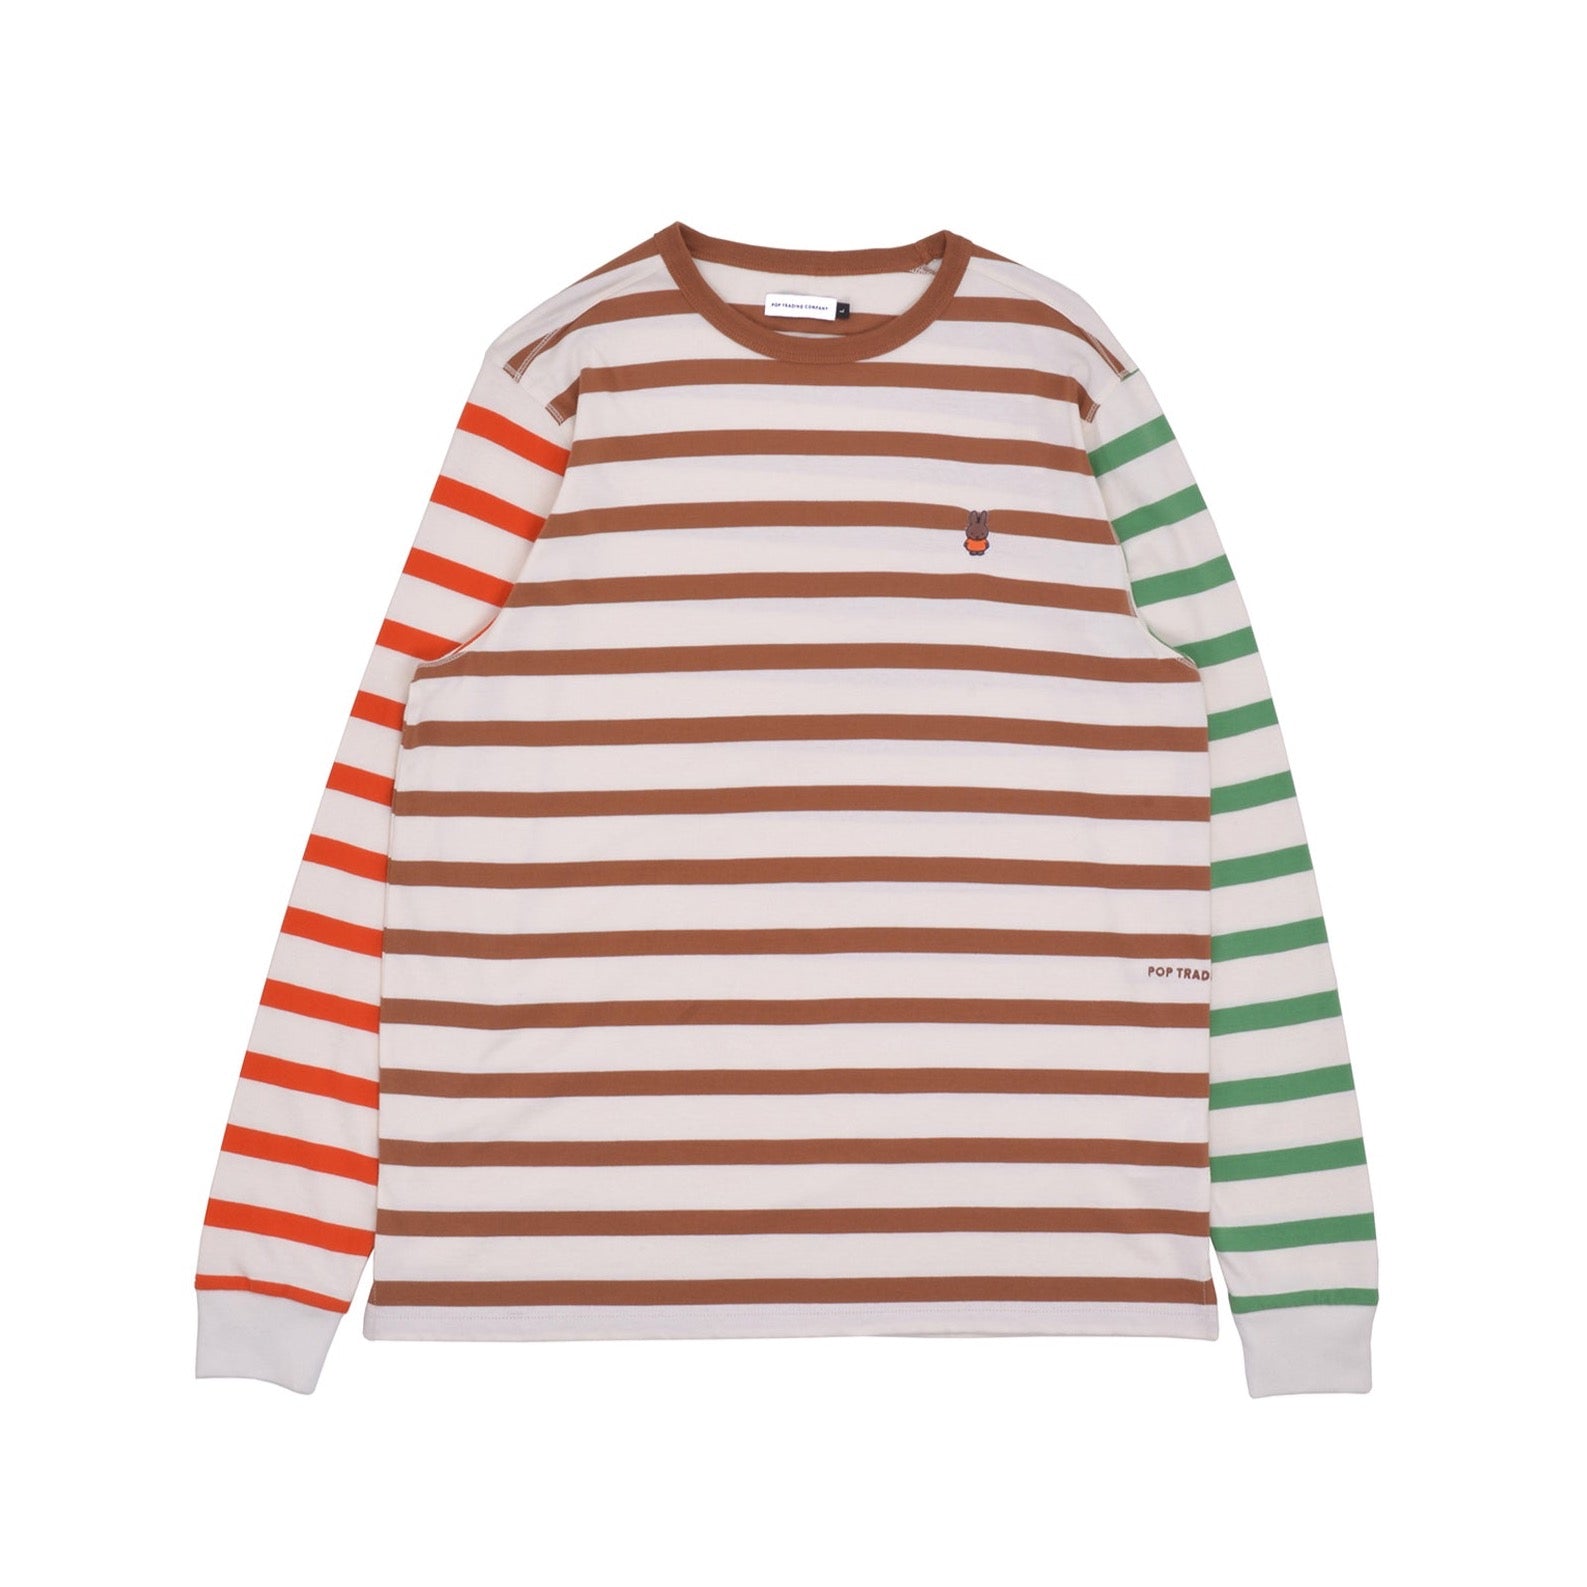 Miffy Embroidered Striped Longsleeve T-shirt